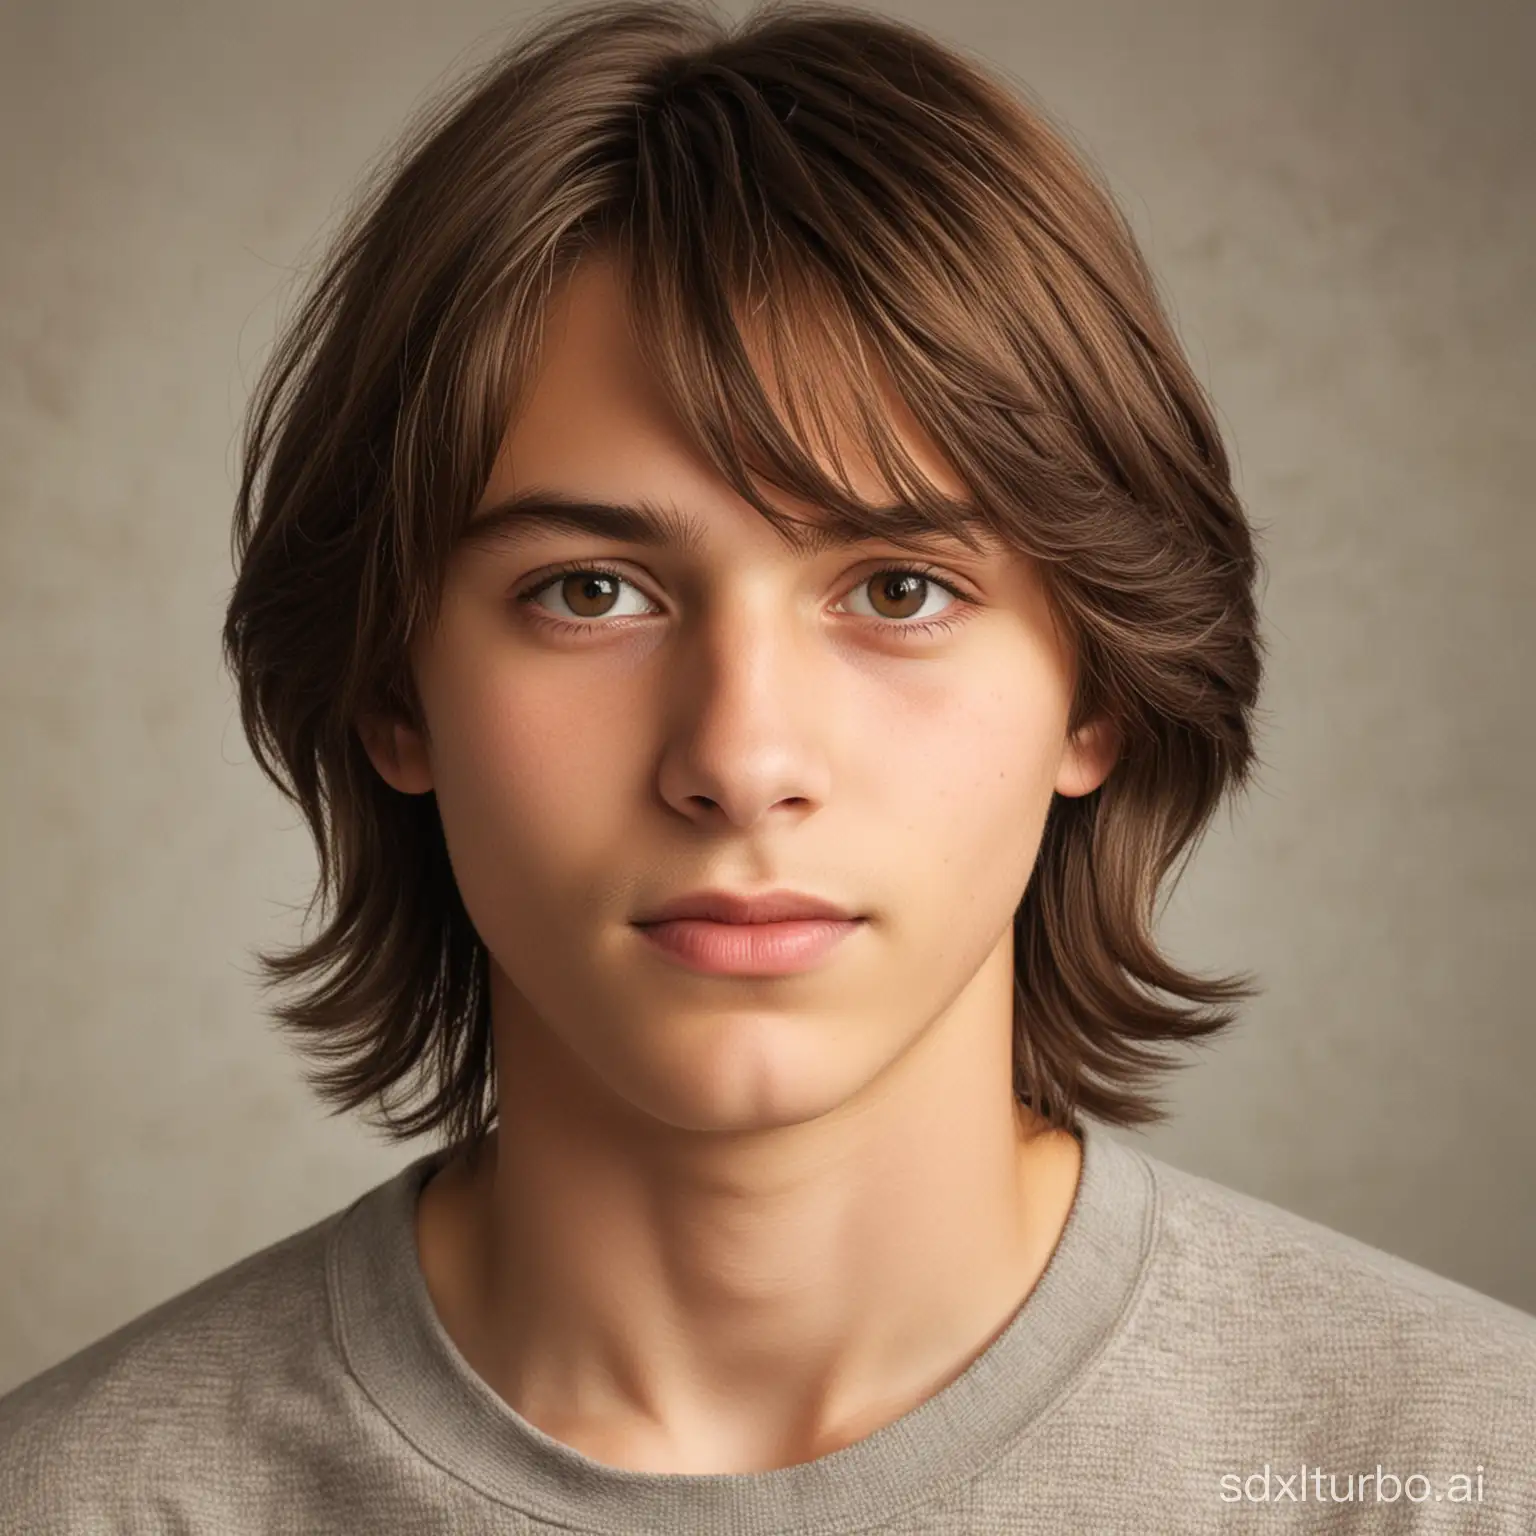 a guy at the age of 14 named Arvid Flodén with brown shoulder-length hair and brown eyes